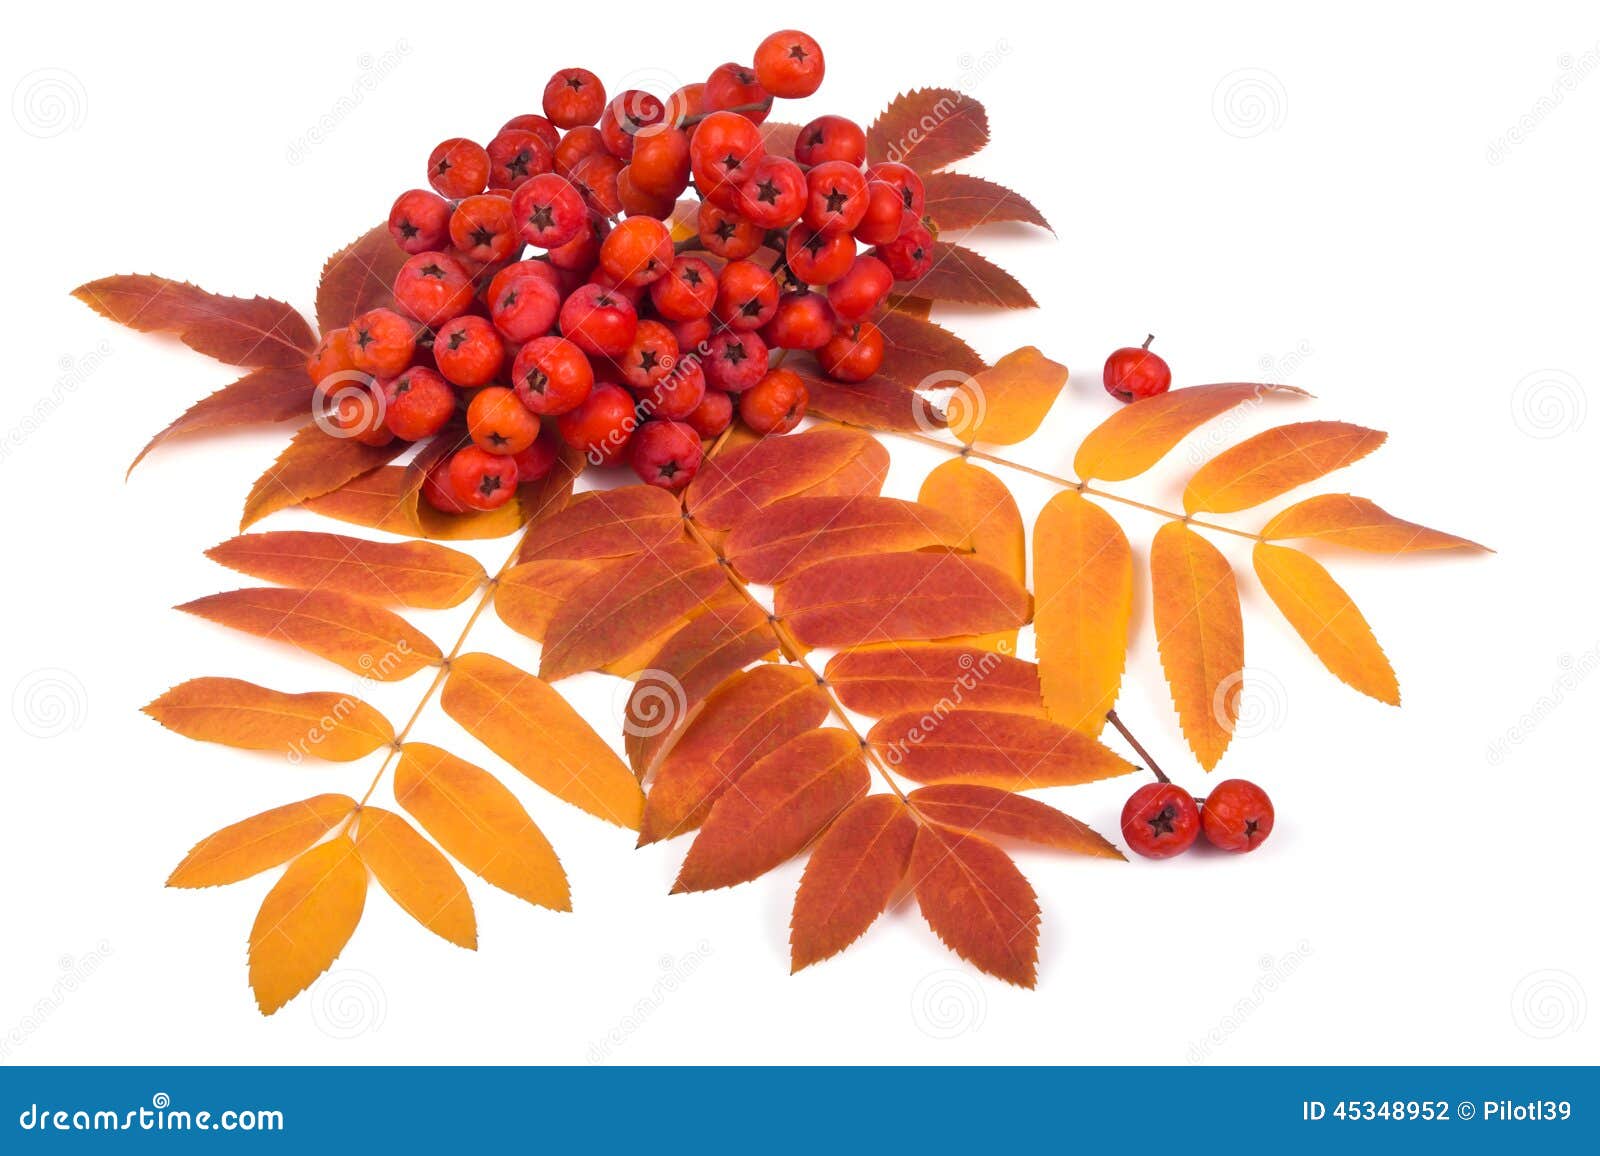 Rowan and leaves stock photo. Image of plant, berries - 45348952